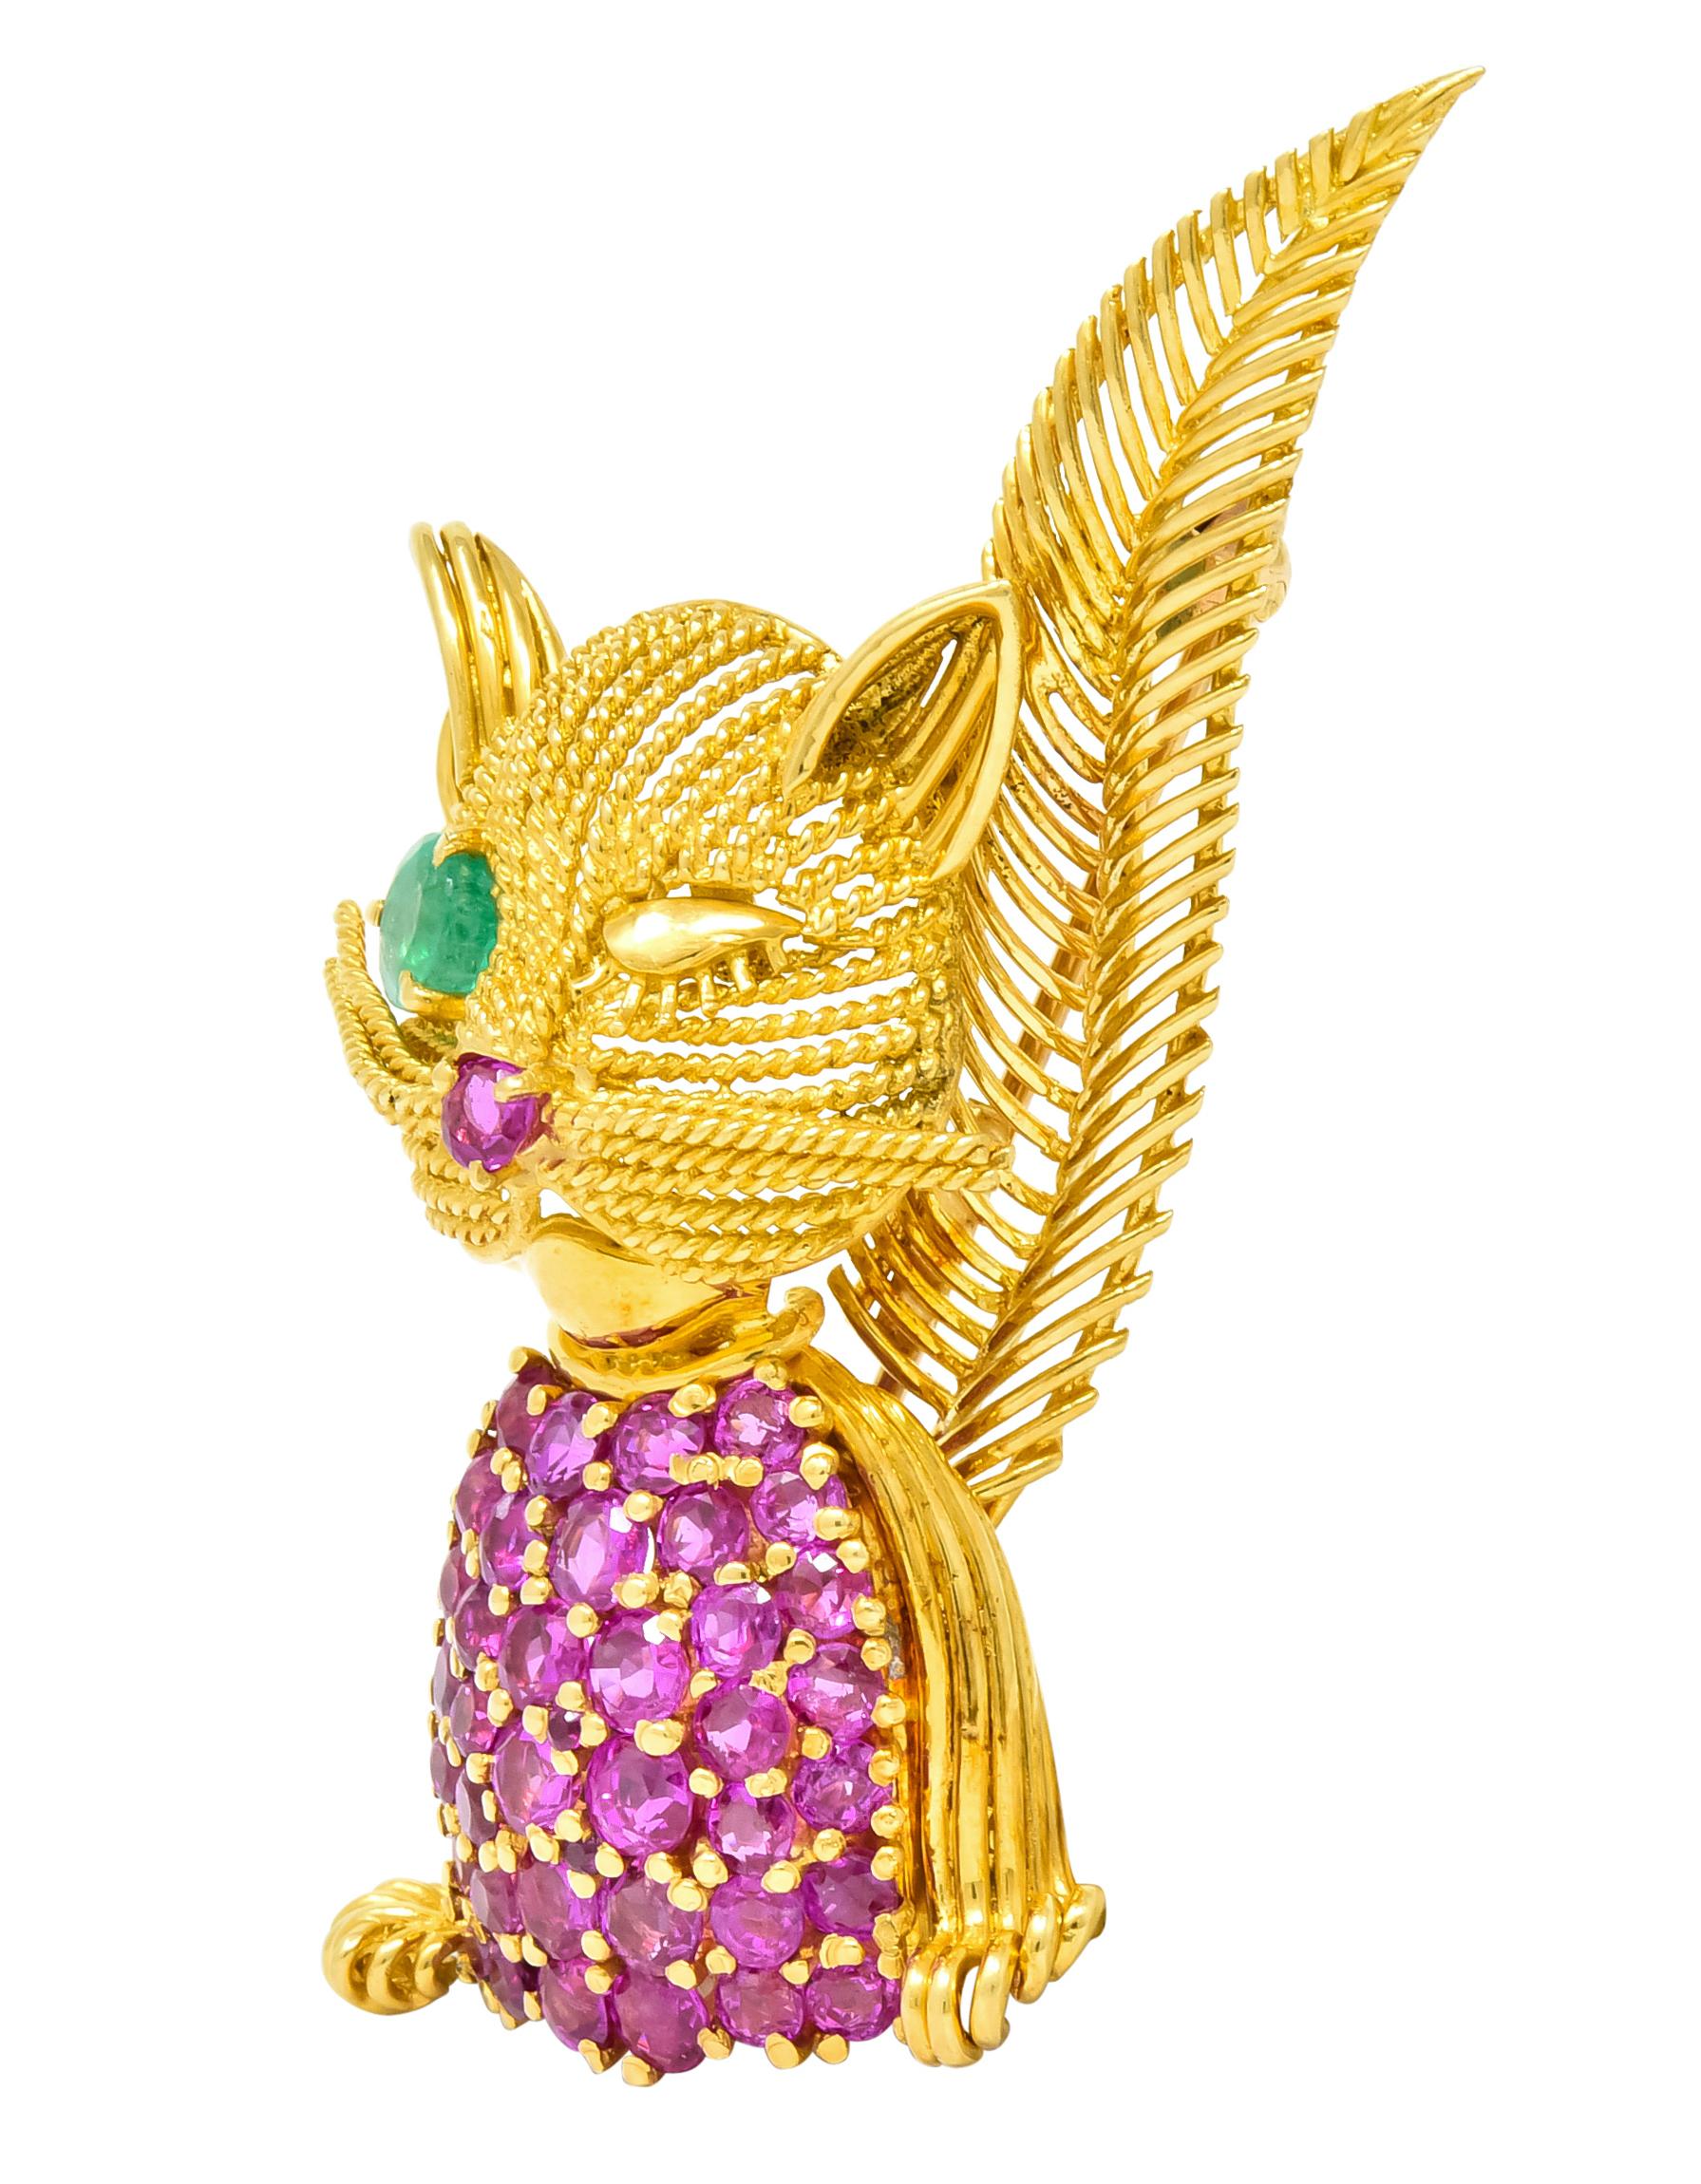 Brooch designed as a winking cat featuring textured fur and whiskers 

Set throughout with approximately 5.00 carats total of rubies, transparent and raspberry red in color

Accented by a round cut emerald eye weighing approximately 0.45 carat,